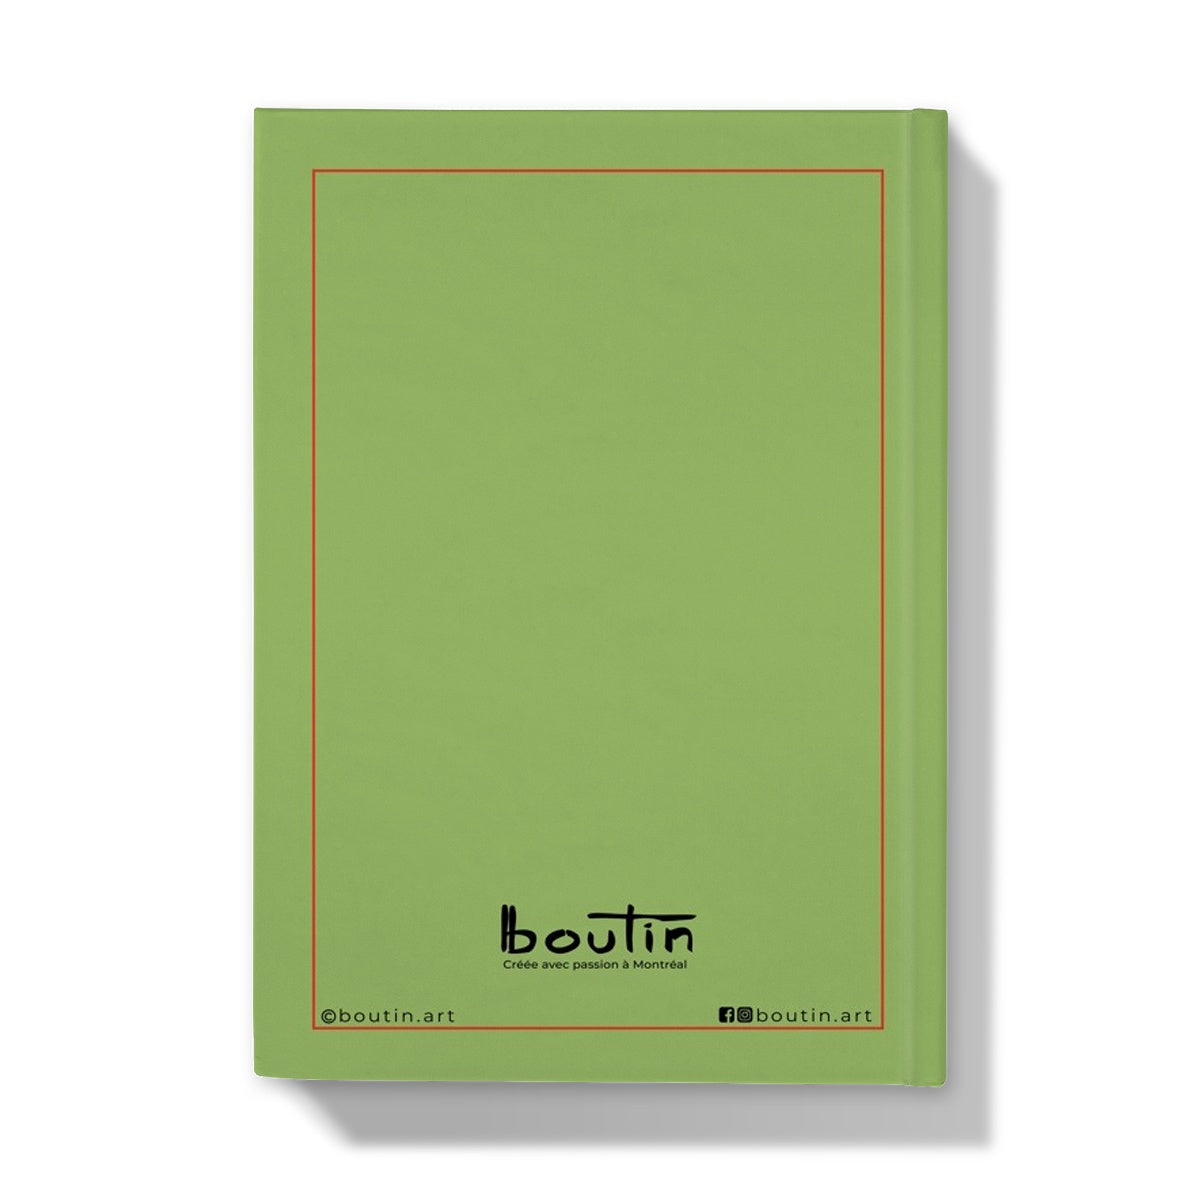 Loulou vert - Notebook by the artist Boutin